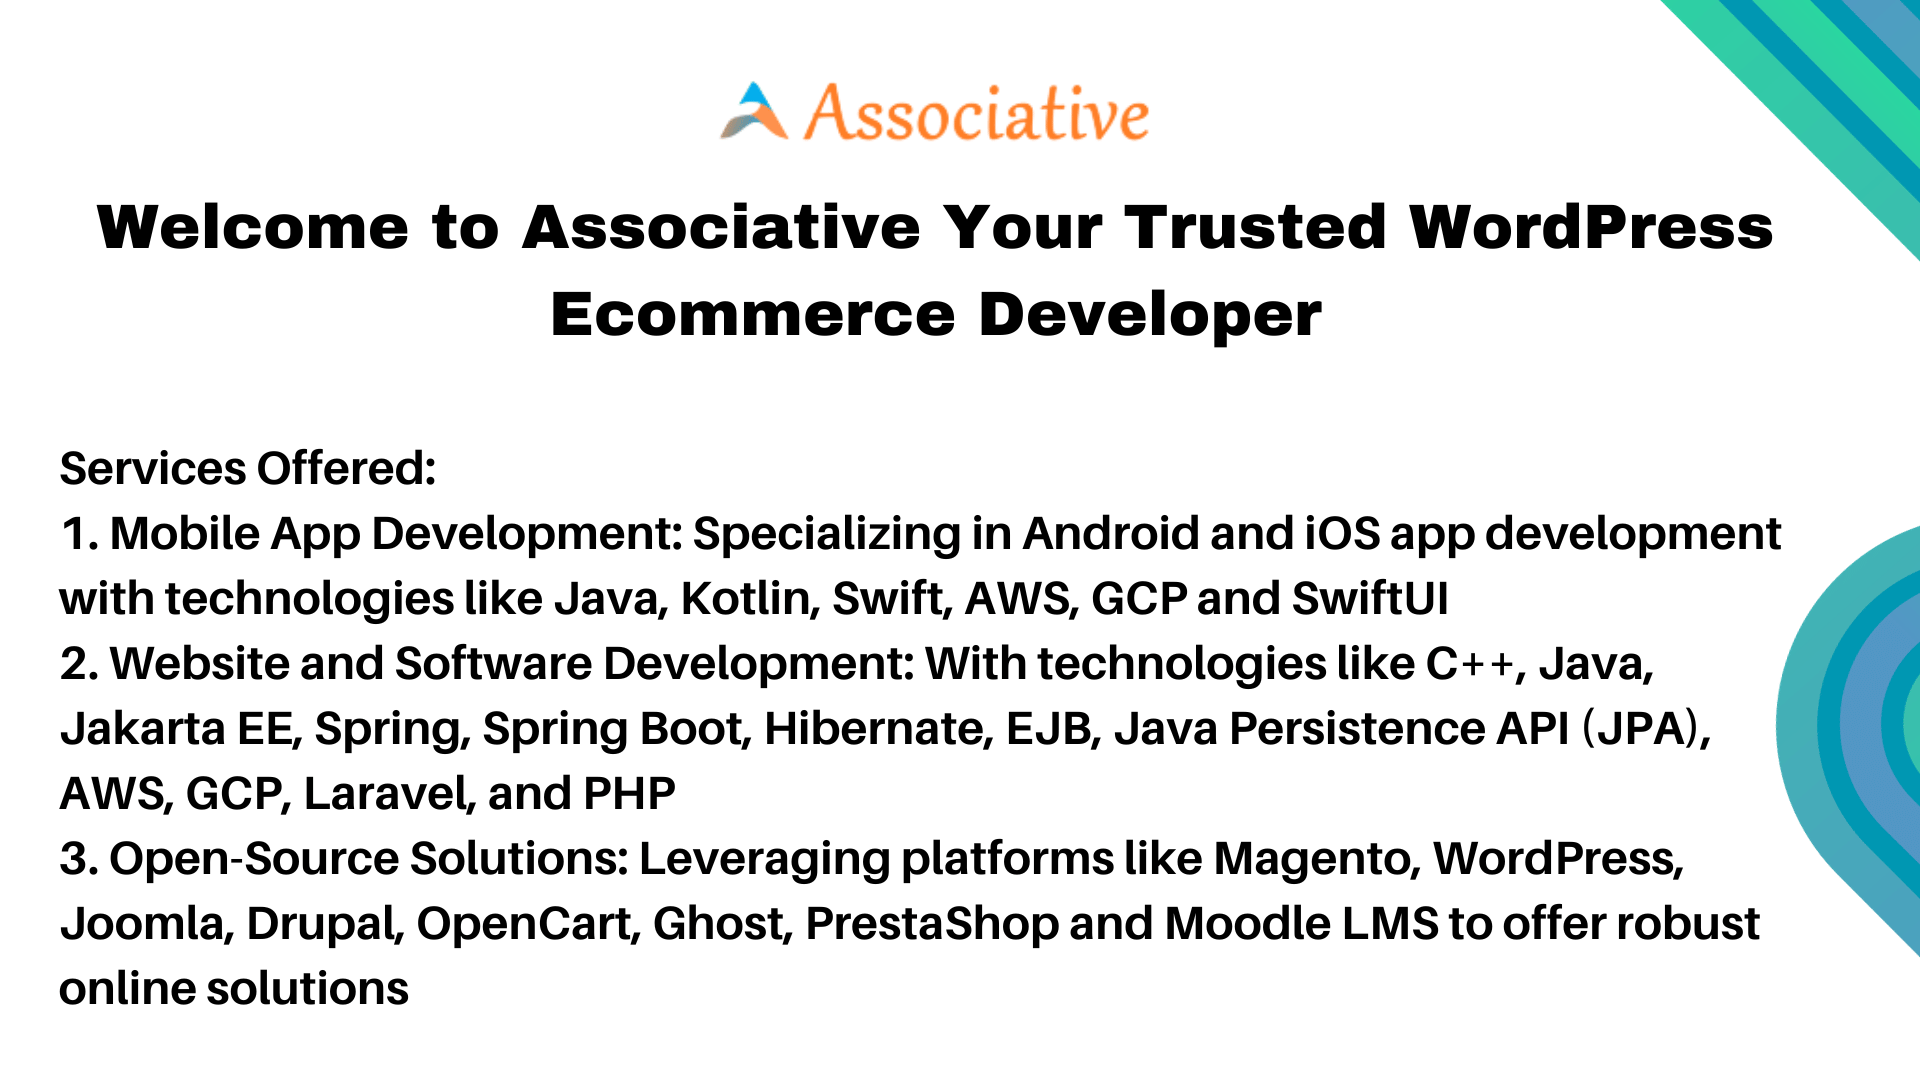 Welcome to Associative Your Trusted WordPress Ecommerce Developer